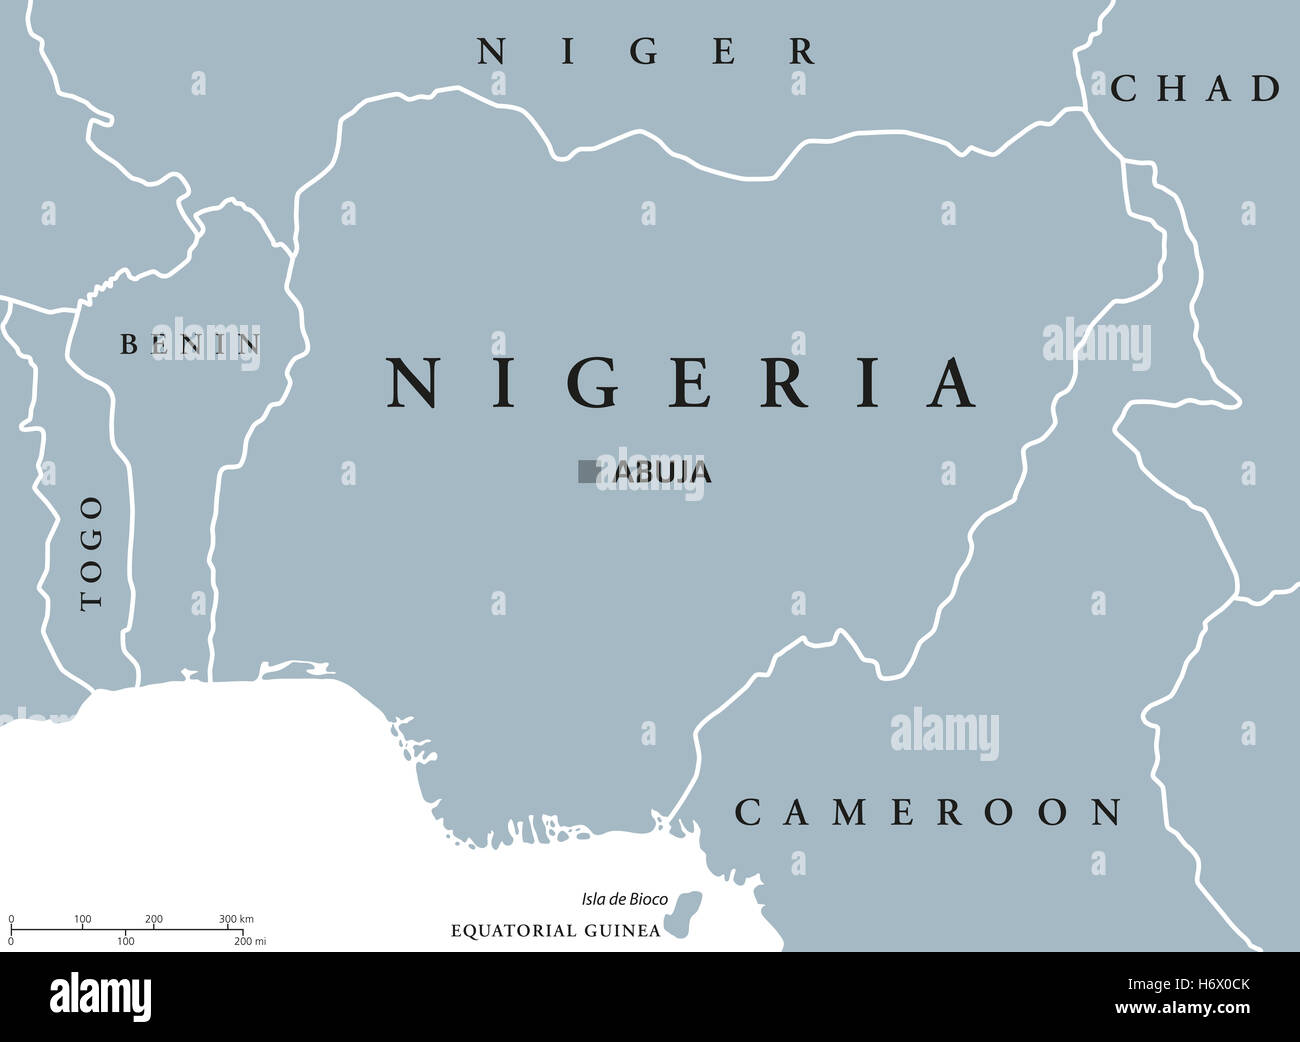 Nigeria political map with capital Abuja, national borders and neighbor countries. Gray illustration with English labeling. Stock Photo